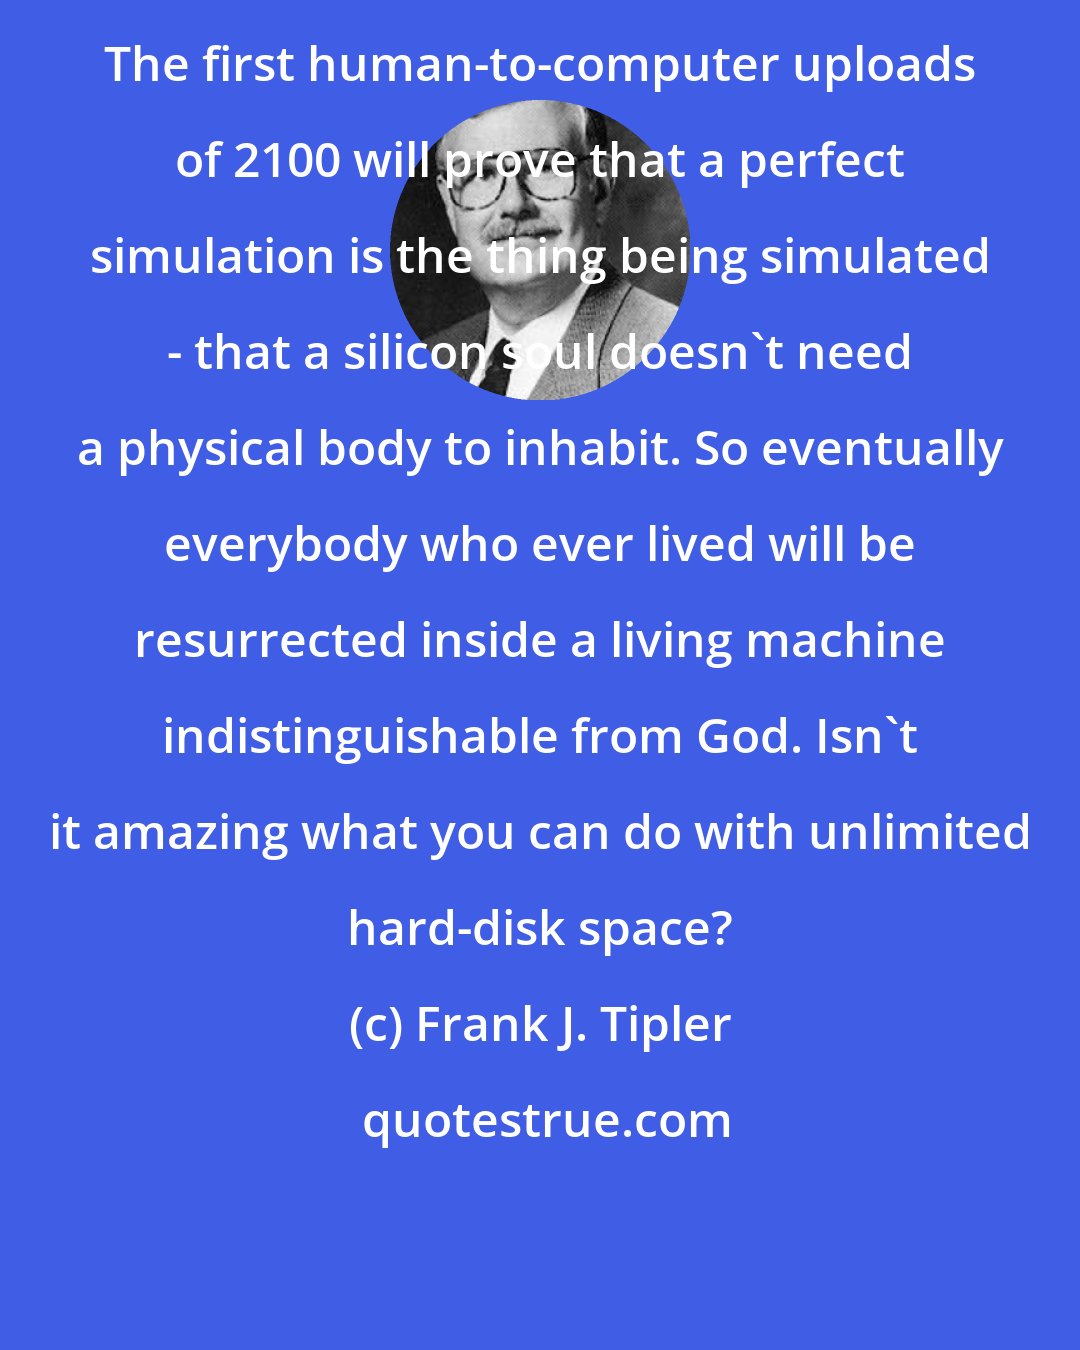 Frank J. Tipler: The first human-to-computer uploads of 2100 will prove that a perfect simulation is the thing being simulated - that a silicon soul doesn't need a physical body to inhabit. So eventually everybody who ever lived will be resurrected inside a living machine indistinguishable from God. Isn't it amazing what you can do with unlimited hard-disk space?